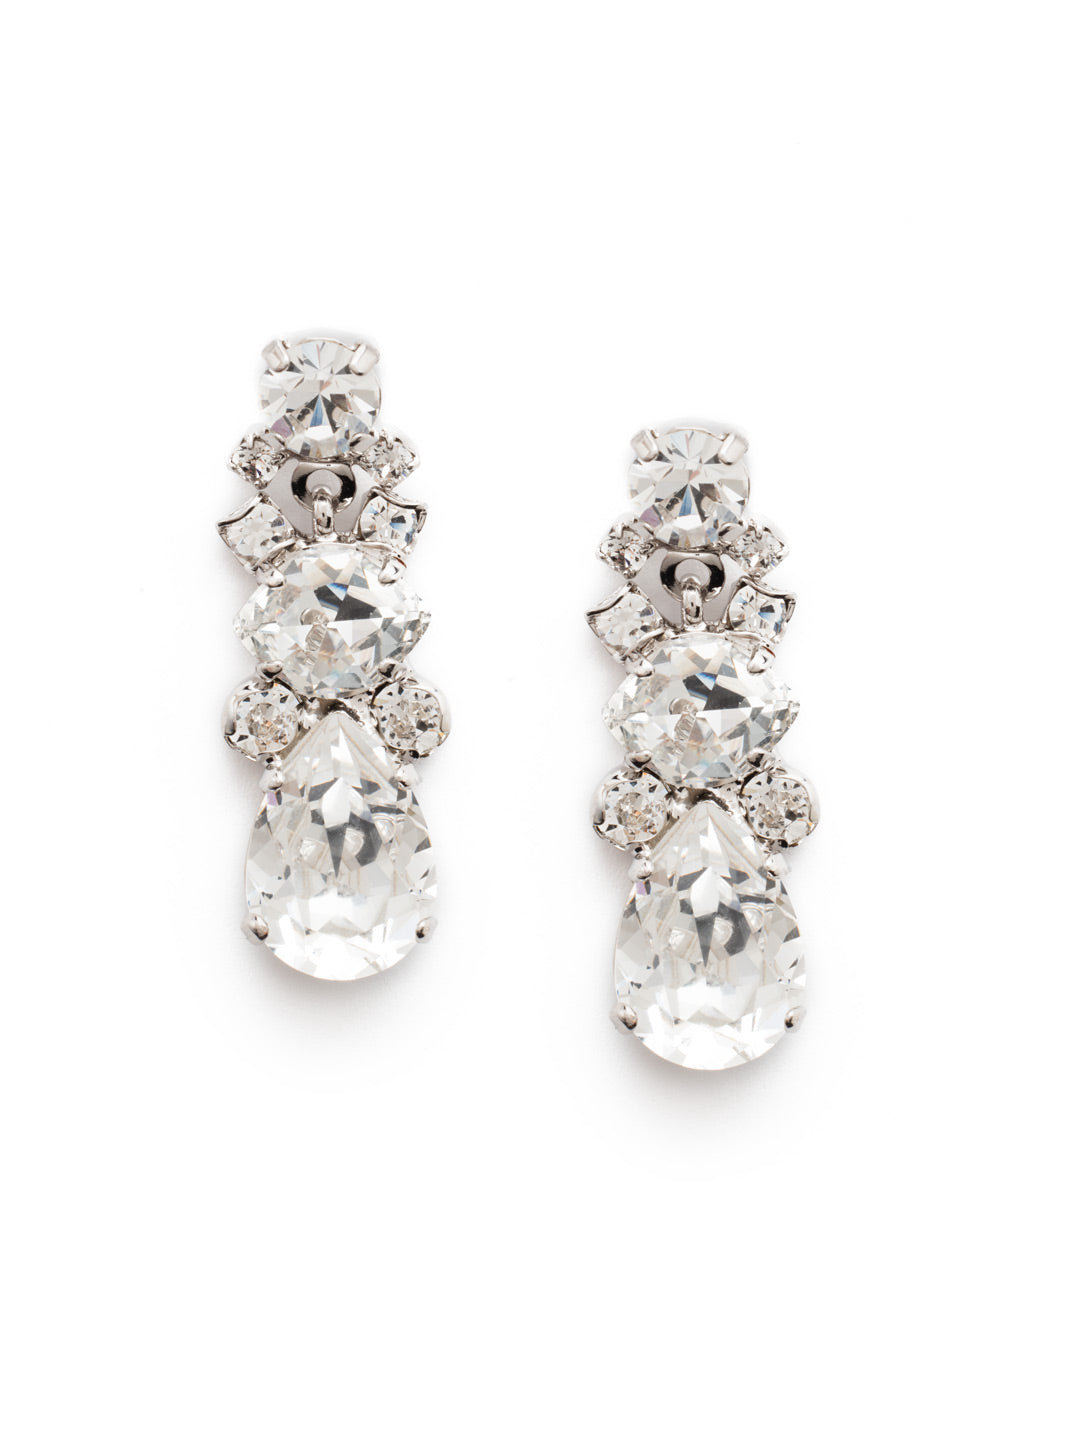 Iberis Dangle Earrings - EDS36RHCRY - <p>A dainty round and an X shaped stone cluster perch atop a beautiful pear shaped crystal. From Sorrelli's Crystal collection in our Palladium Silver-tone finish.</p>